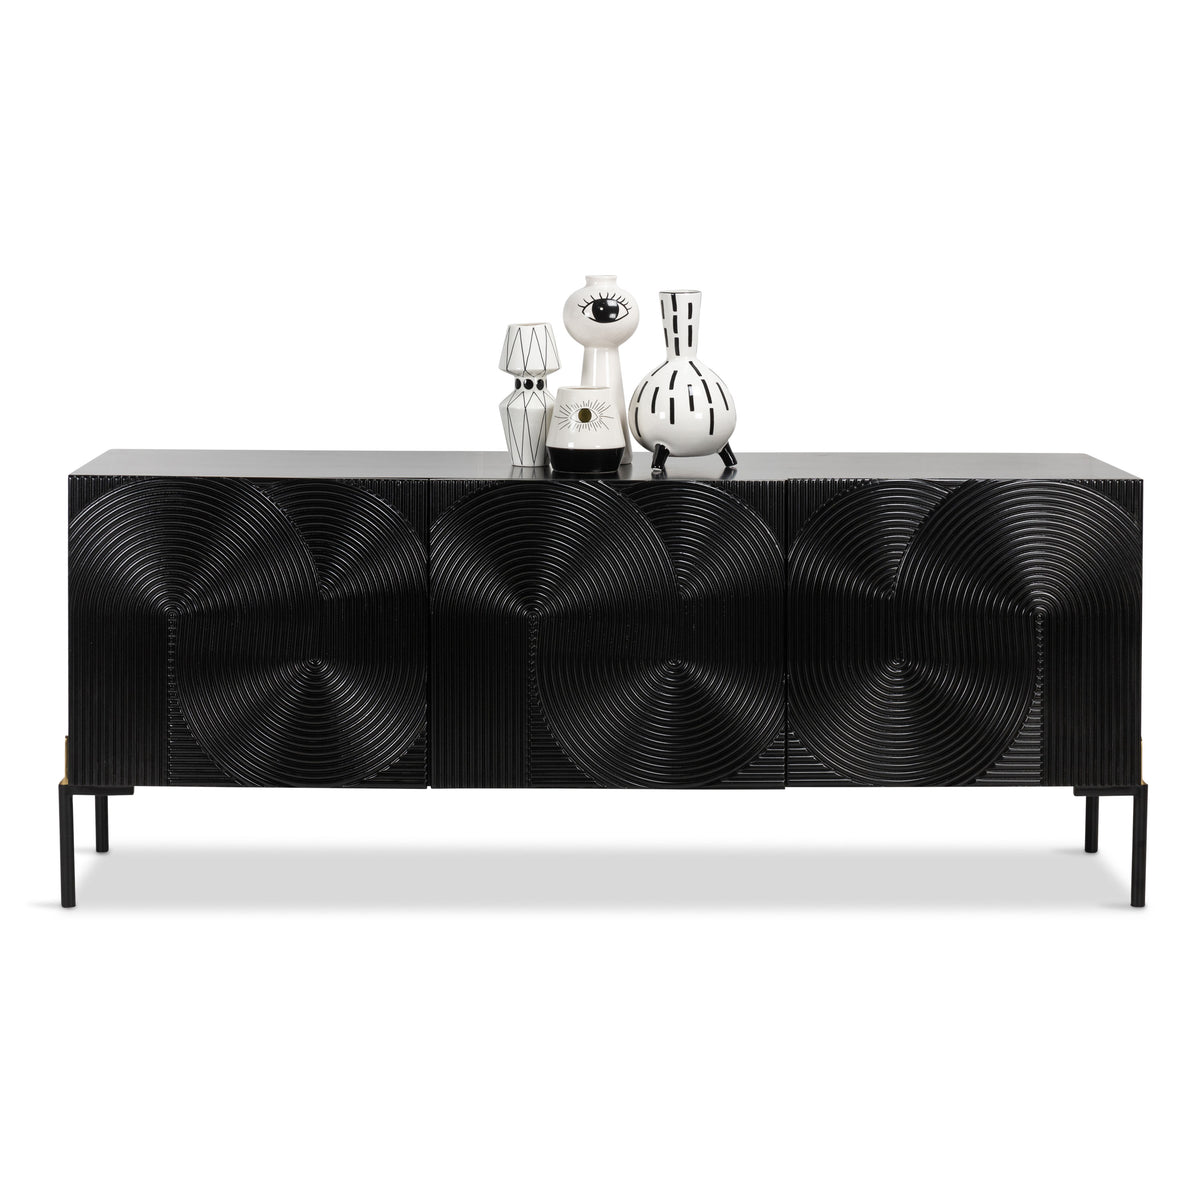 8 Track 3 Door Credenza with Matte Black and Brass Post Legs